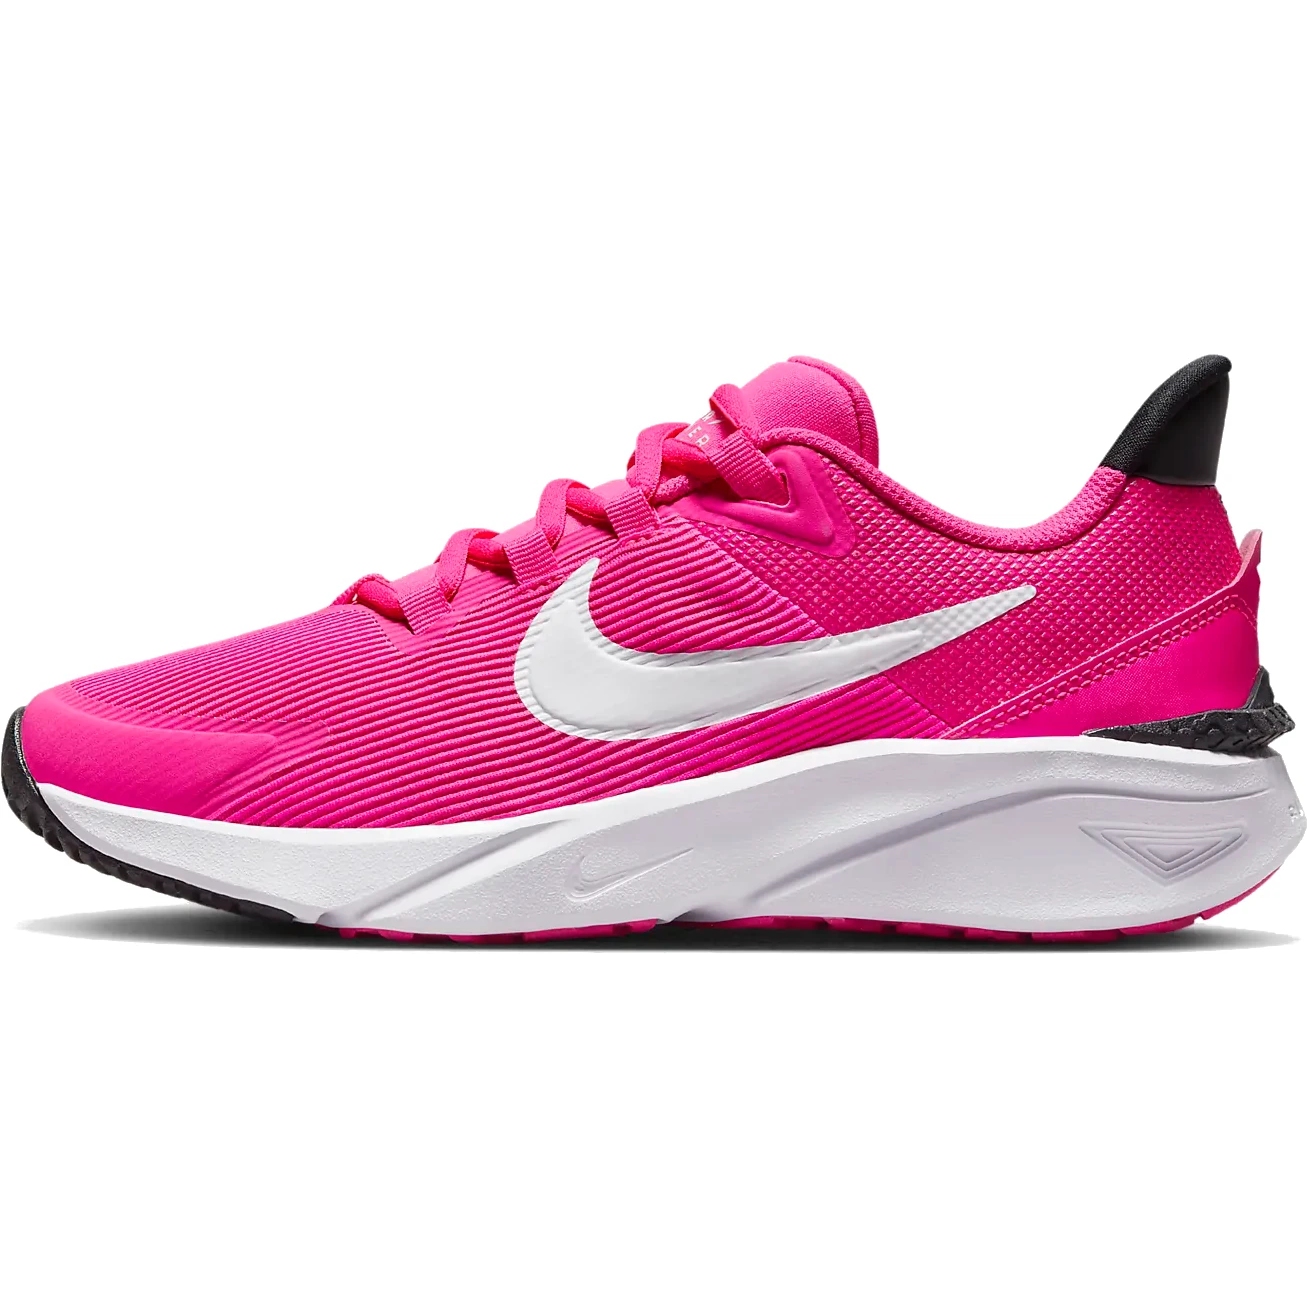 Picture of Nike Star Runner 4 Shoes Kids - fierce pink/black-white DX7615-601